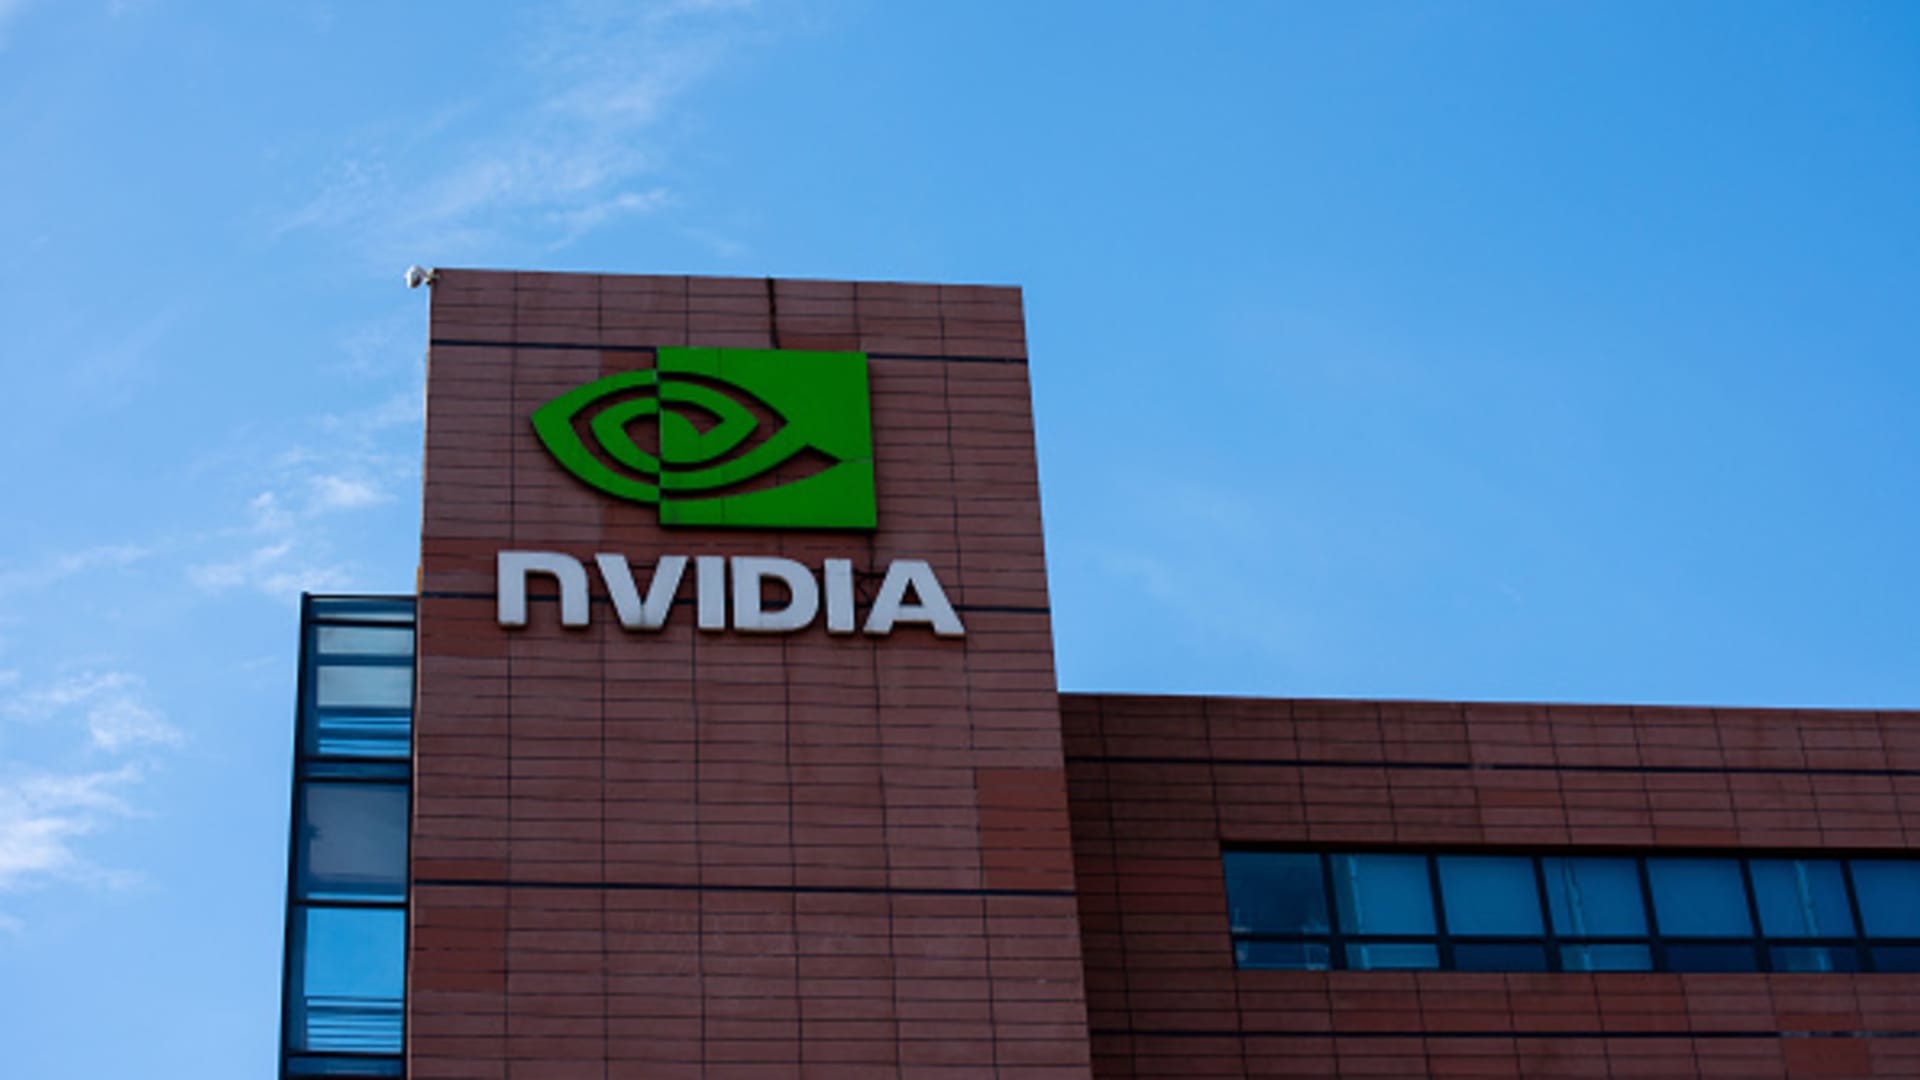 Stocks making the biggest moves midday: Nvidia, Okta, Five Below, Bed Bath & Beyond and more